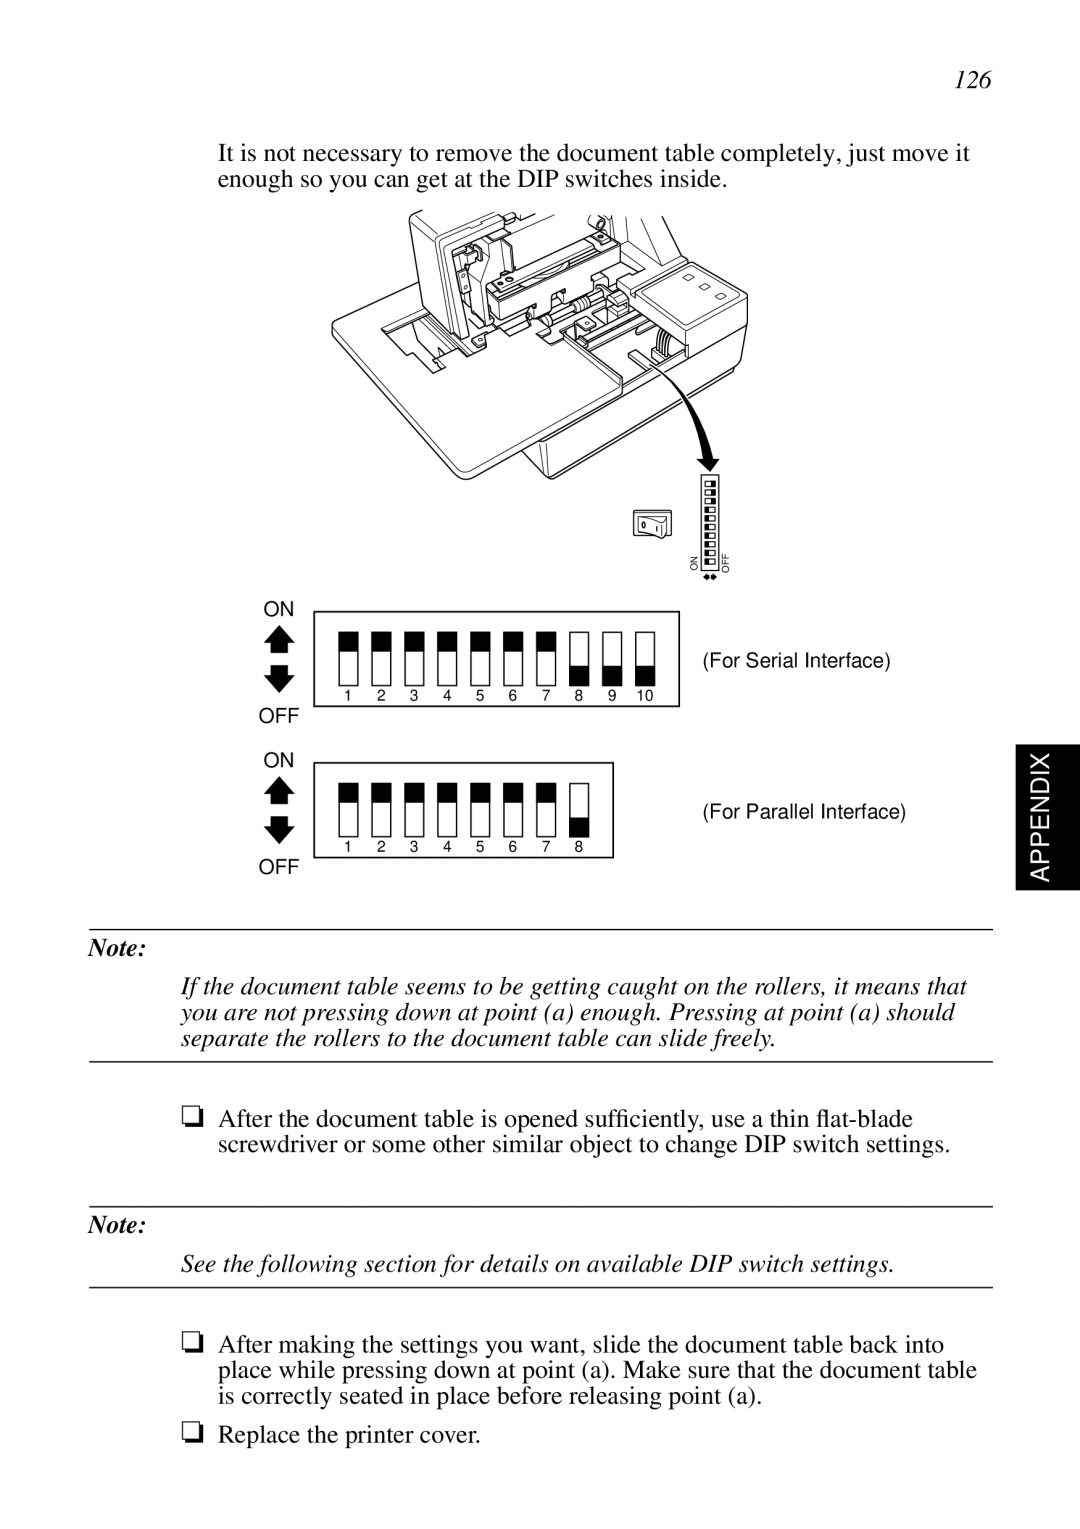 Star Micronics SP298 user manual Appendix, See the following section for details on available DIP switch settings 